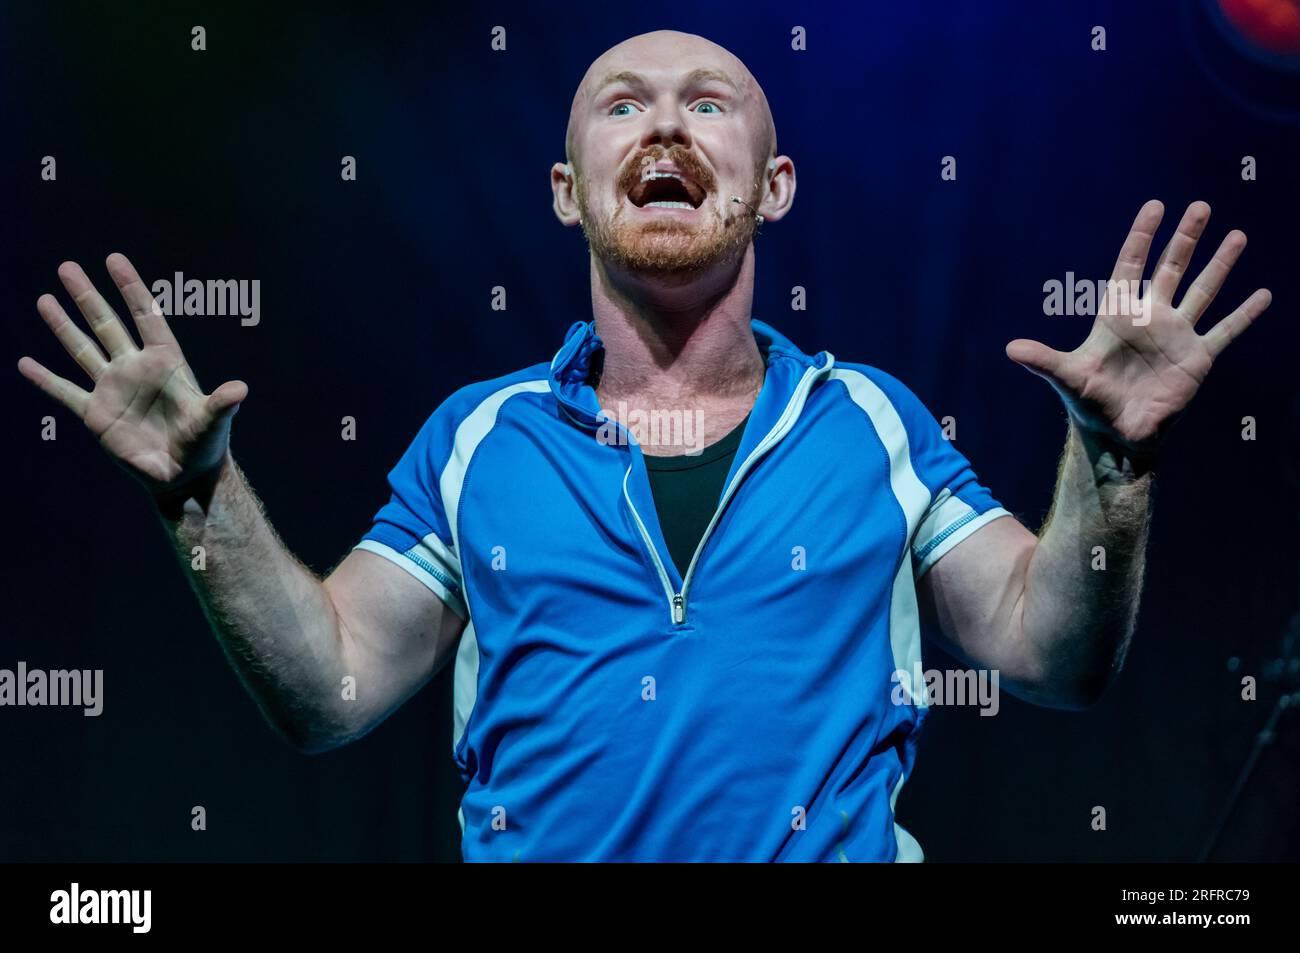 Edinburgh, Scotland, UK, 5th August 2023. Edinburgh festival fringe  Pleasance launch: Excerpts from the Pleasance Fringe shows are launched at a preview event. Pictured: an actor in the musical show Public - The Musical. Credit: Sally Anderson/Alamy Live News Stock Photo